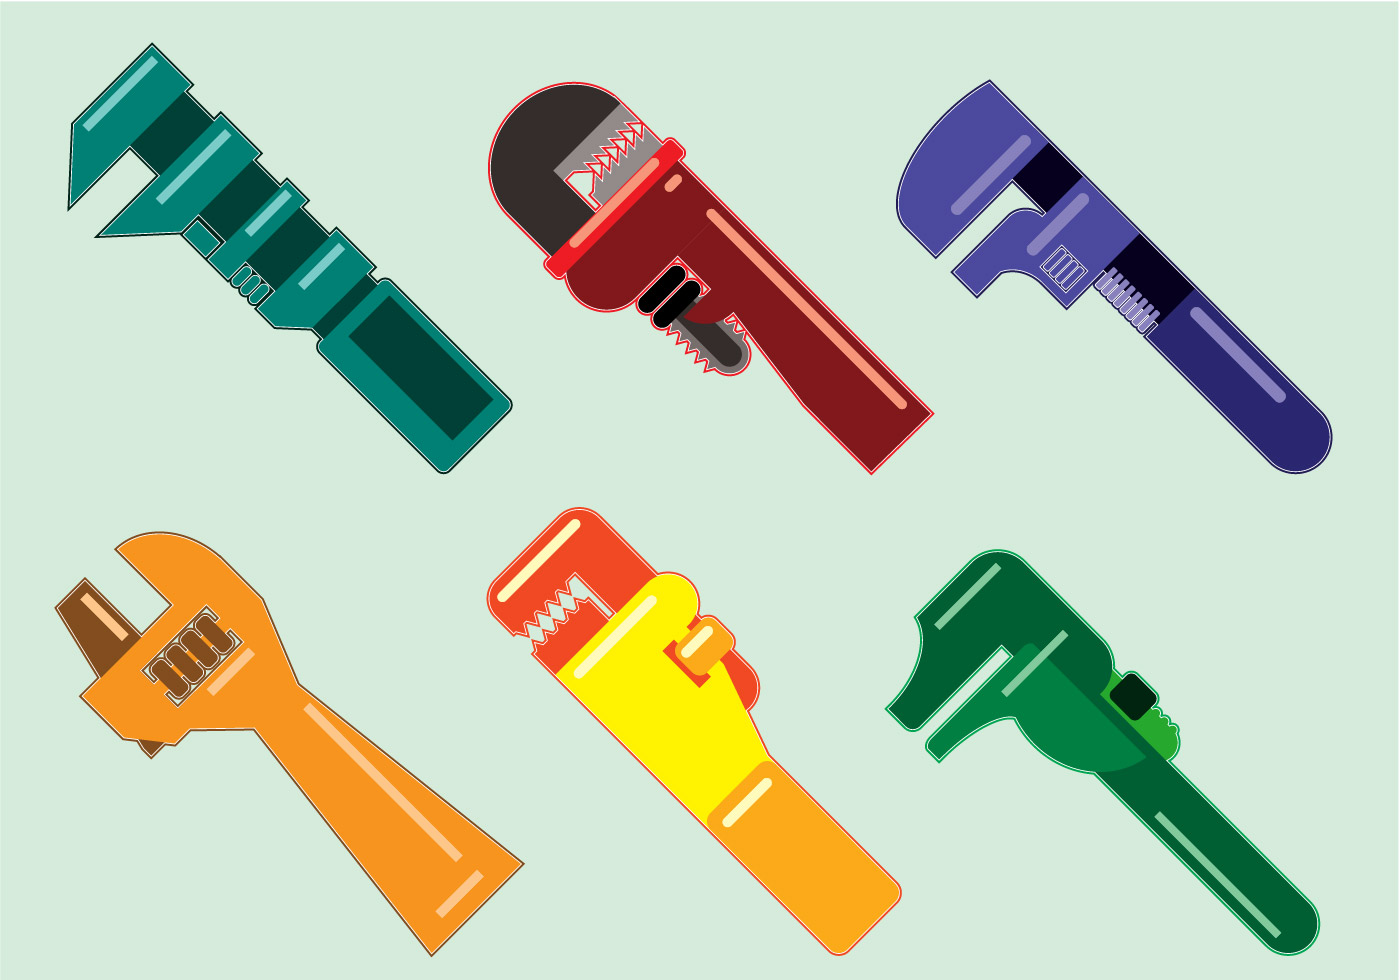 Monkey Wrench Vector - Download Free Vector Art, Stock Graphics & Images